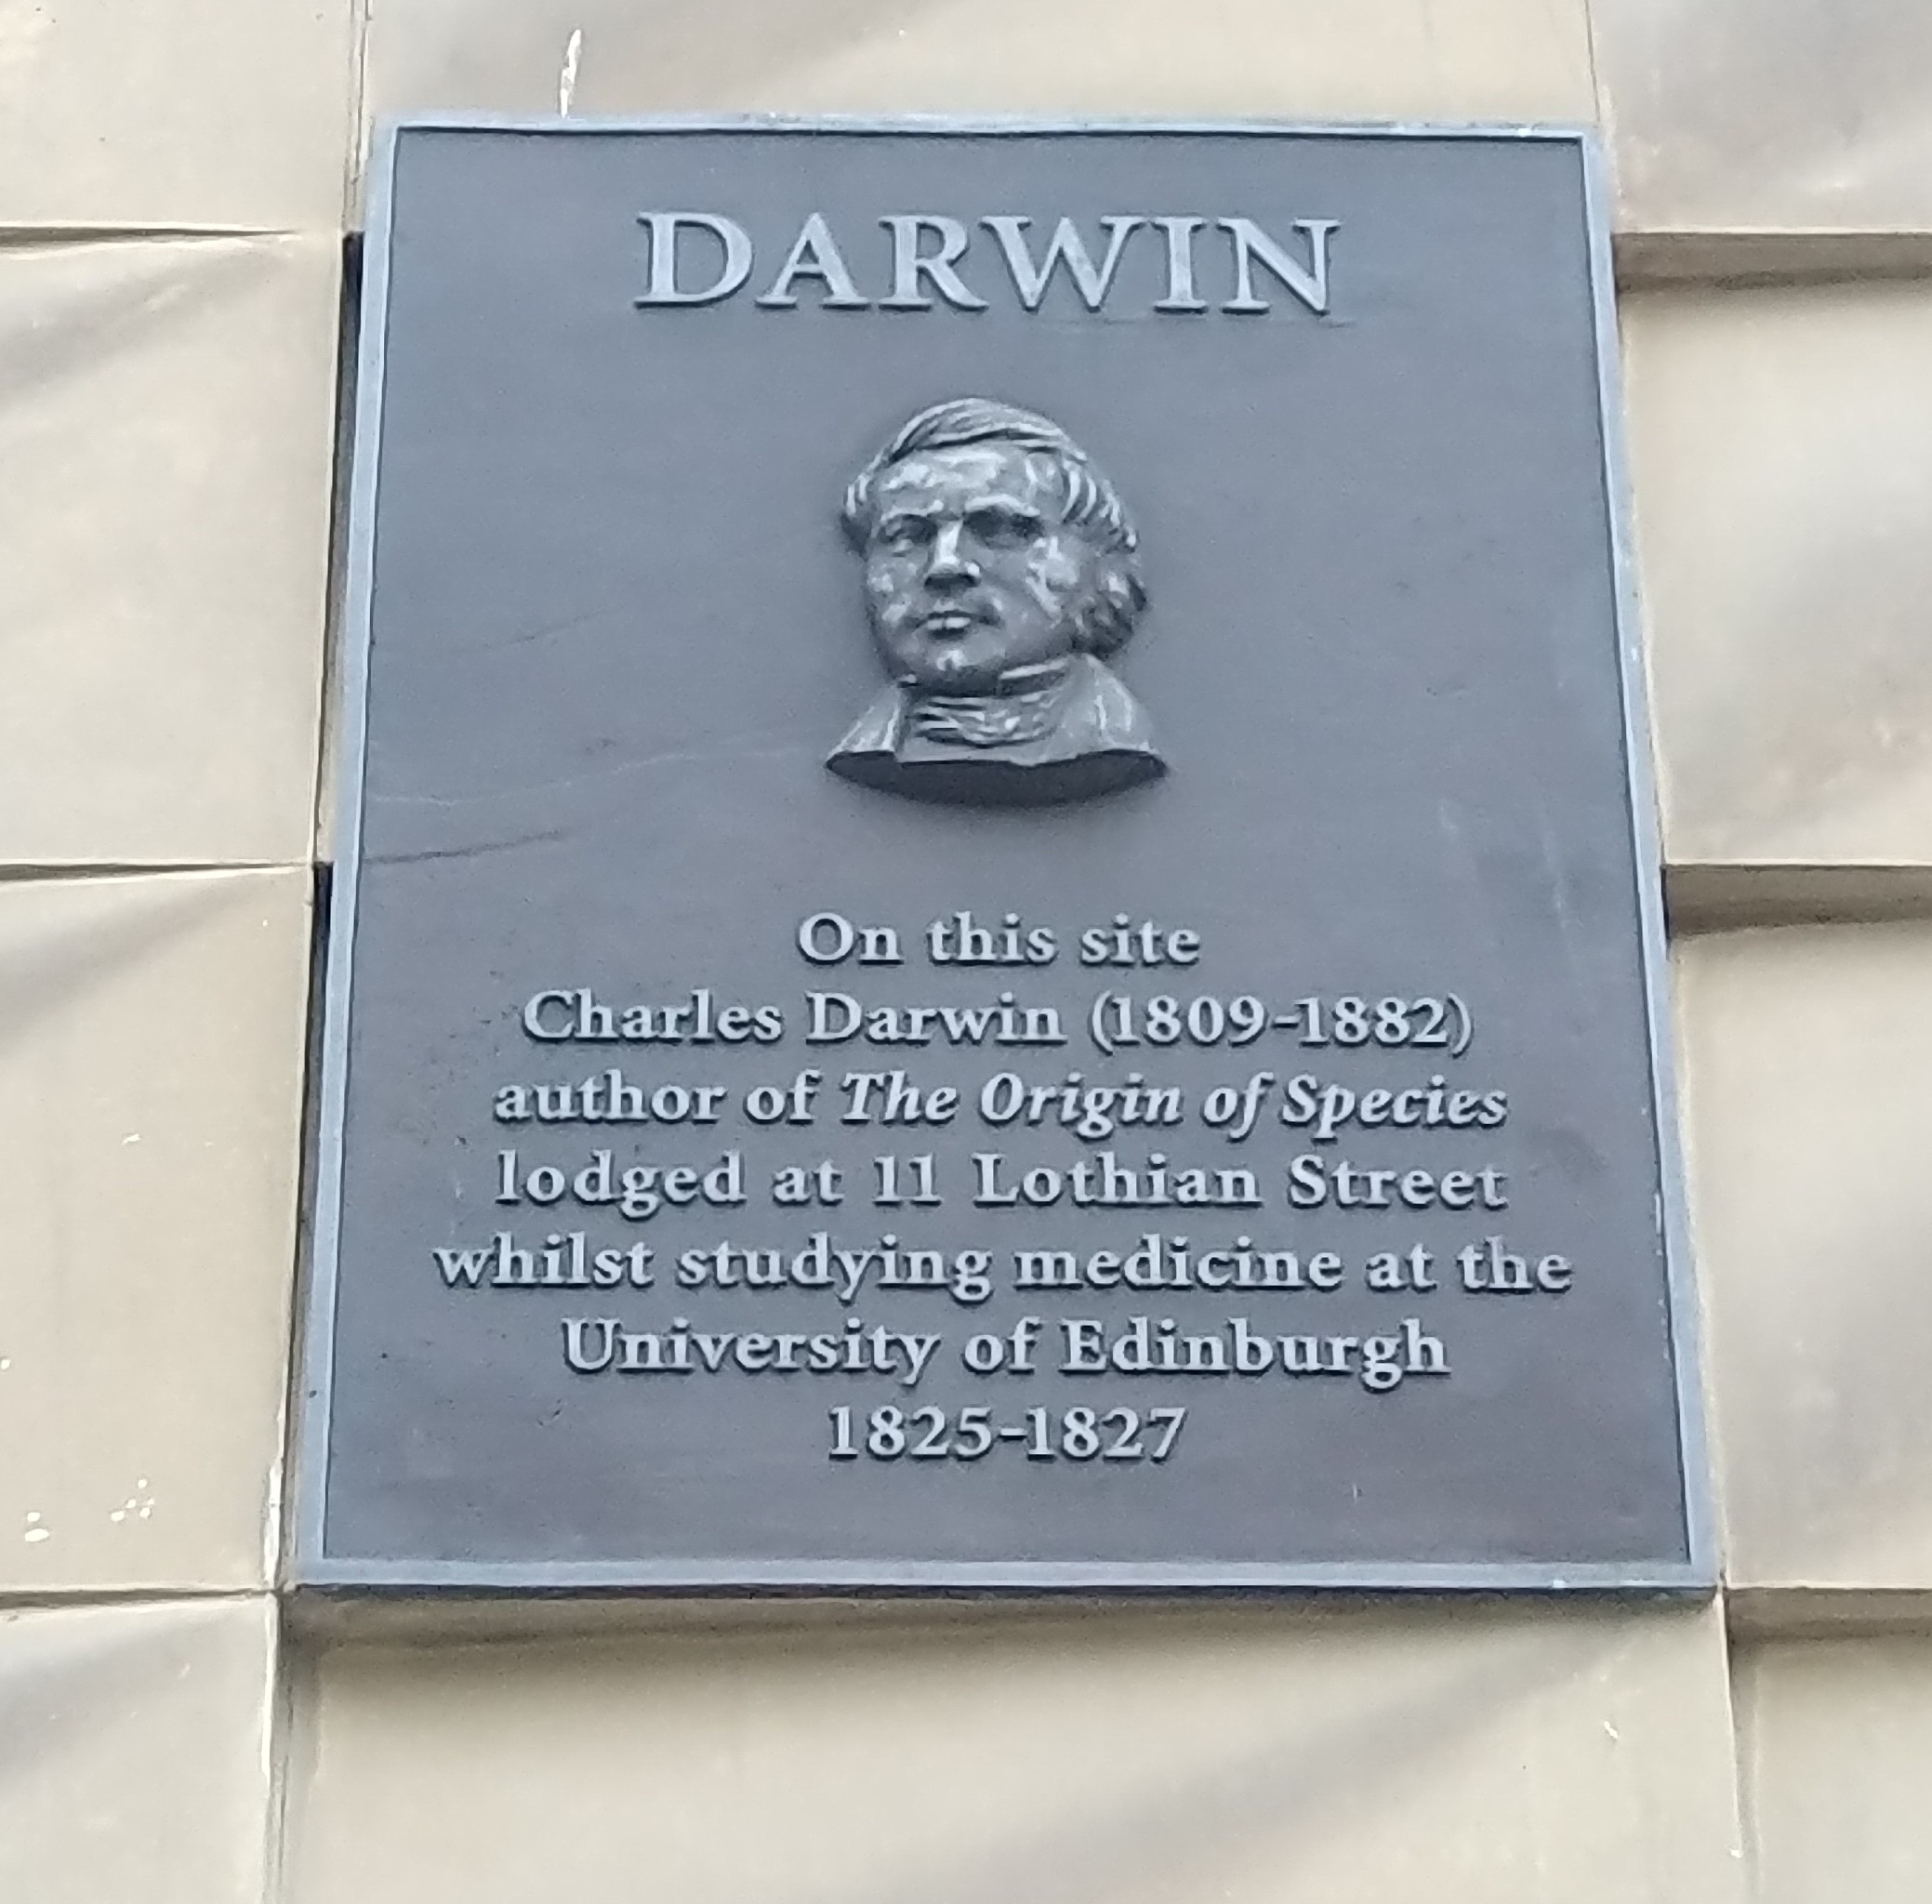 Photograph of the Charles Darwin plaque on Lothian Street, Edinburgh, which says "On this site Charles Darwin (1809-1882) author of The Origin of Spieces lodged at 11 Lothian Street whilst studying medicine at the University of Edinburgh 1825-1827